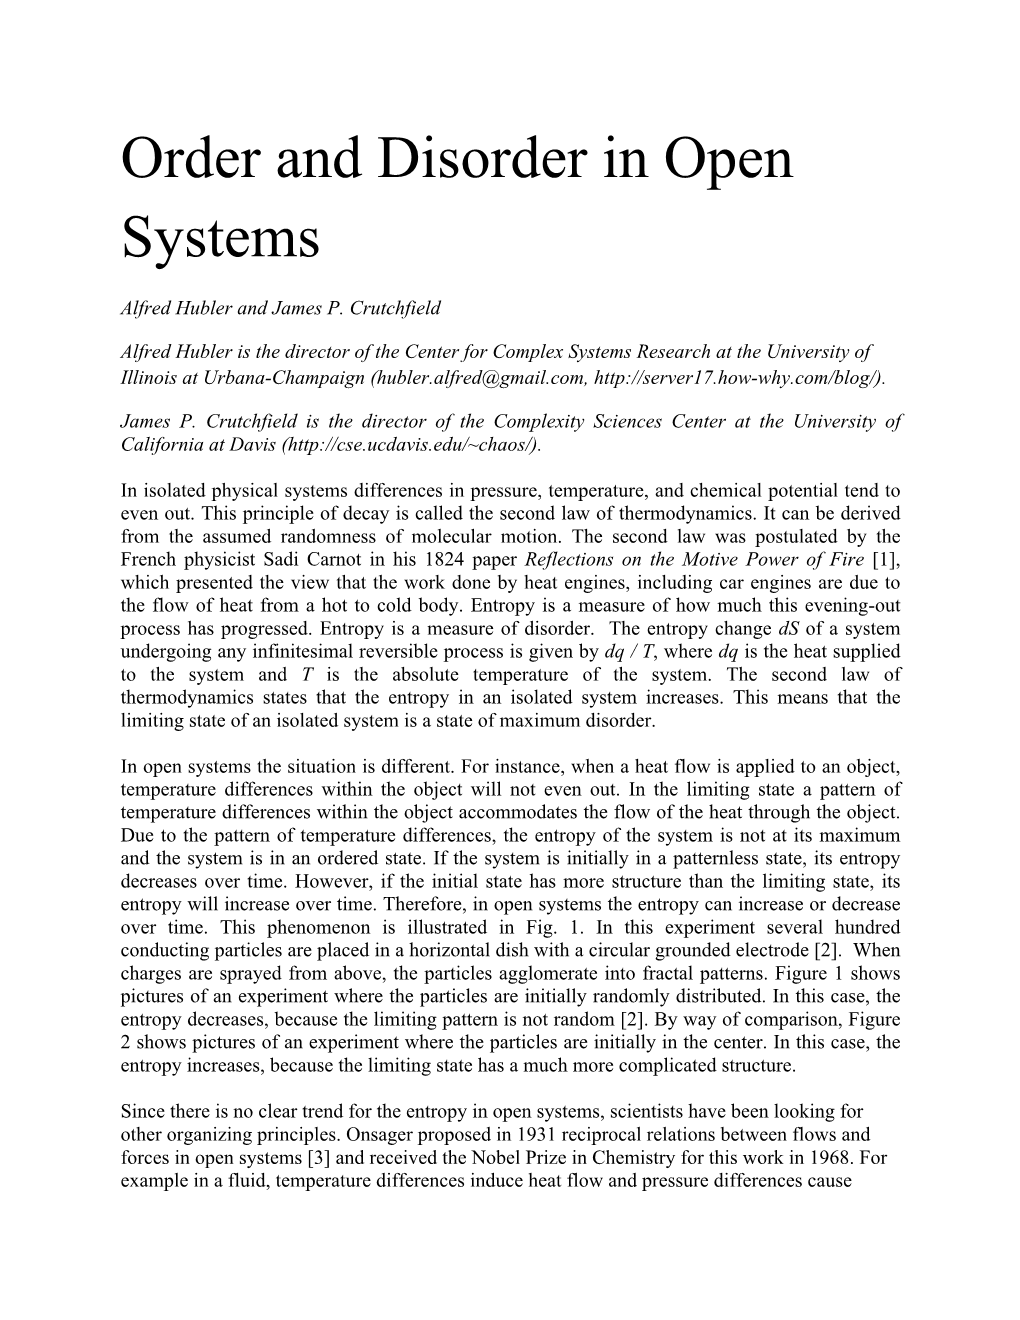 Order and Disorder in Open Systems